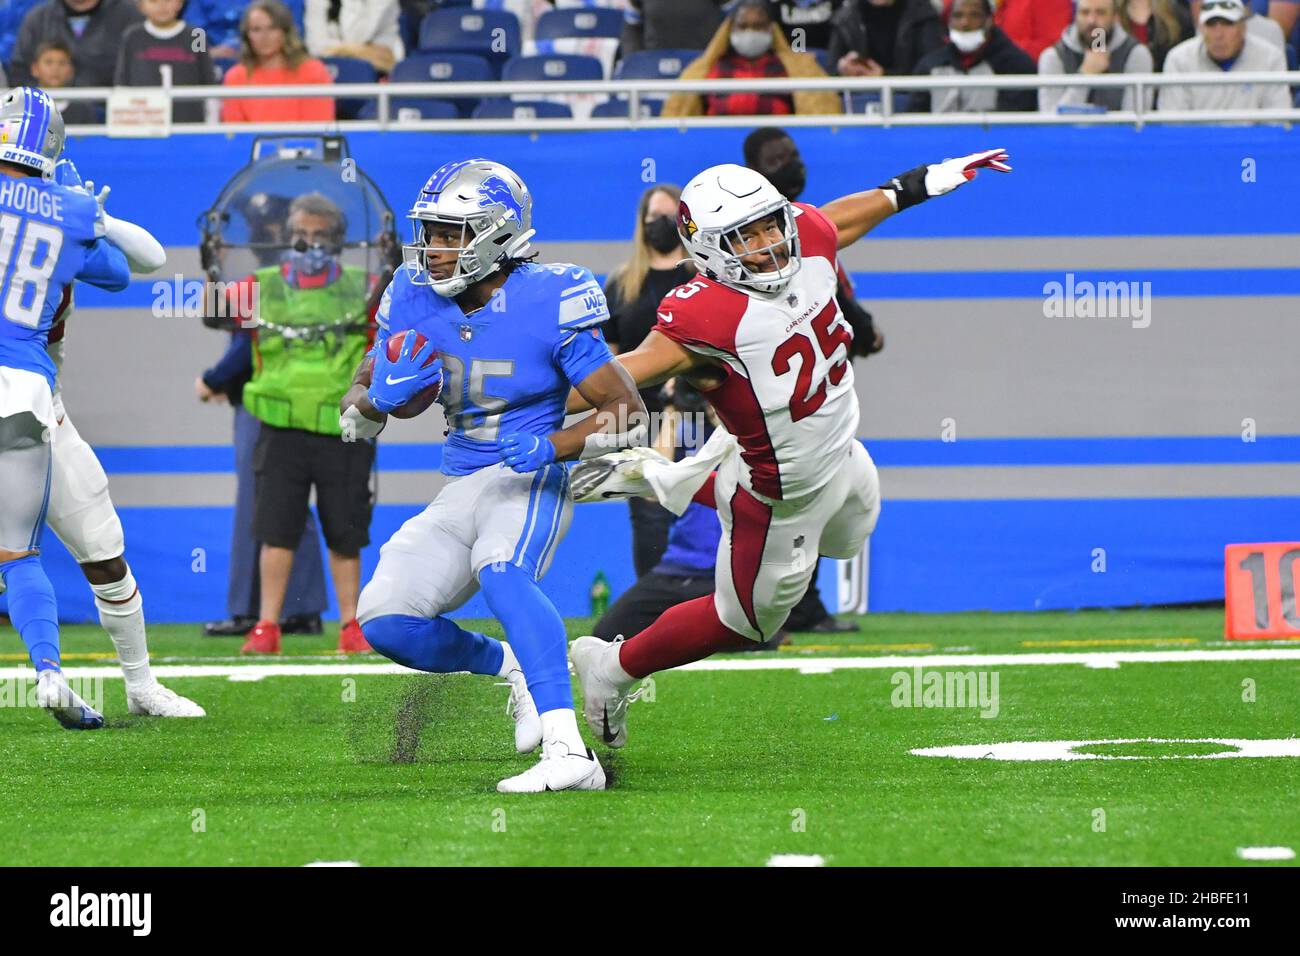 DETROIT, MI - DECEMBER 19: Arizona Cardinals LB Zaven Collins (25) misses a tackle of Detroit Lions RB Godwin Igwebuike (35) on a kickoff return during NFL game between Arizona Cardinals and Detroit Lions on December 19, 2021 at Ford Field in Detroit, MI (Photo by Allan Dranberg/CSM) Stock Photo